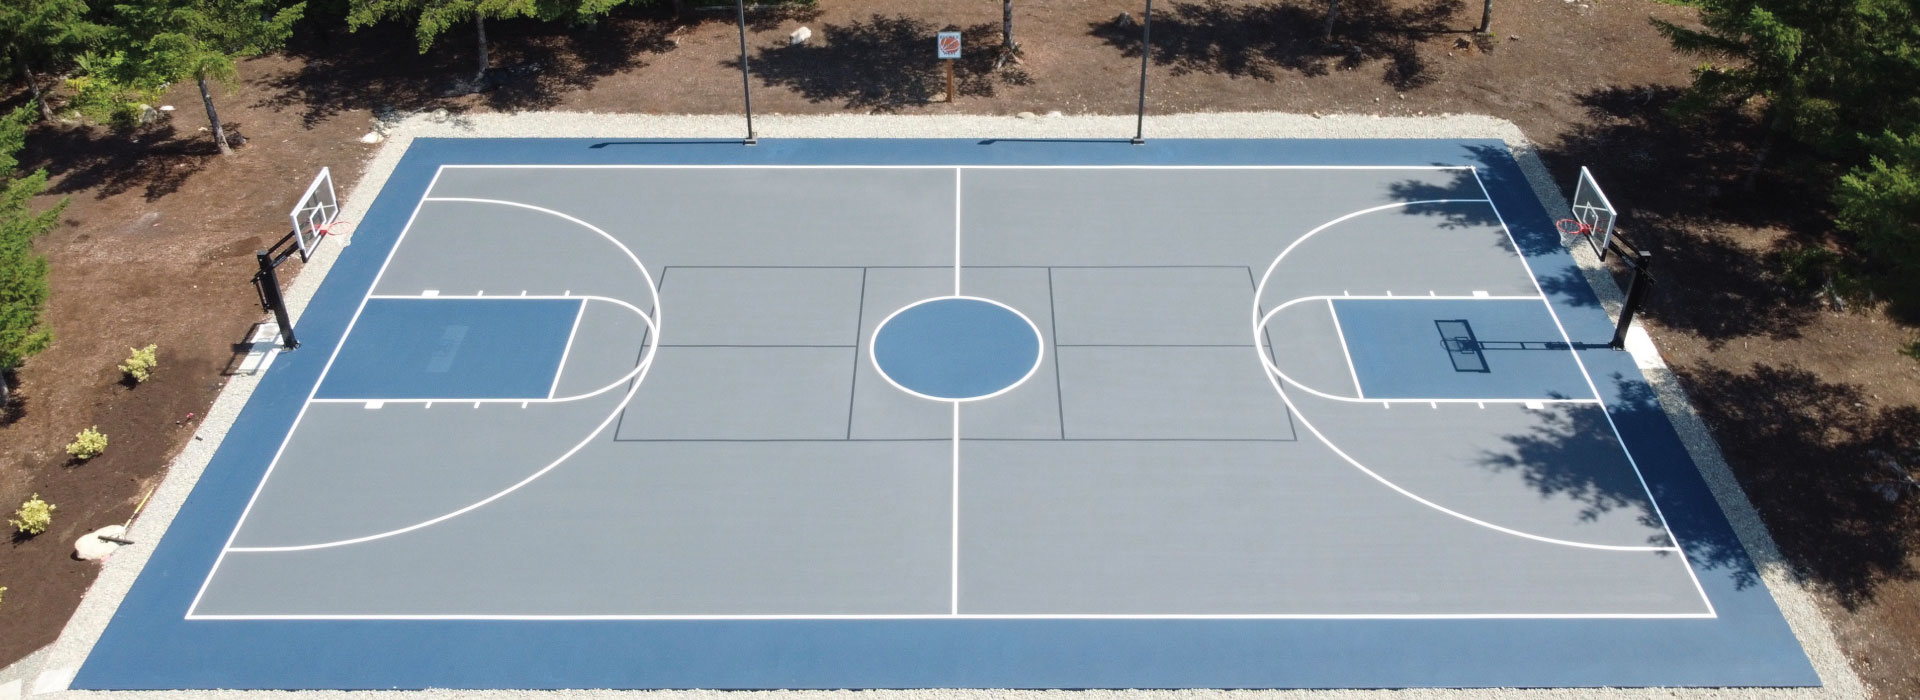 NW Court Consultants Basketball court Surfacing